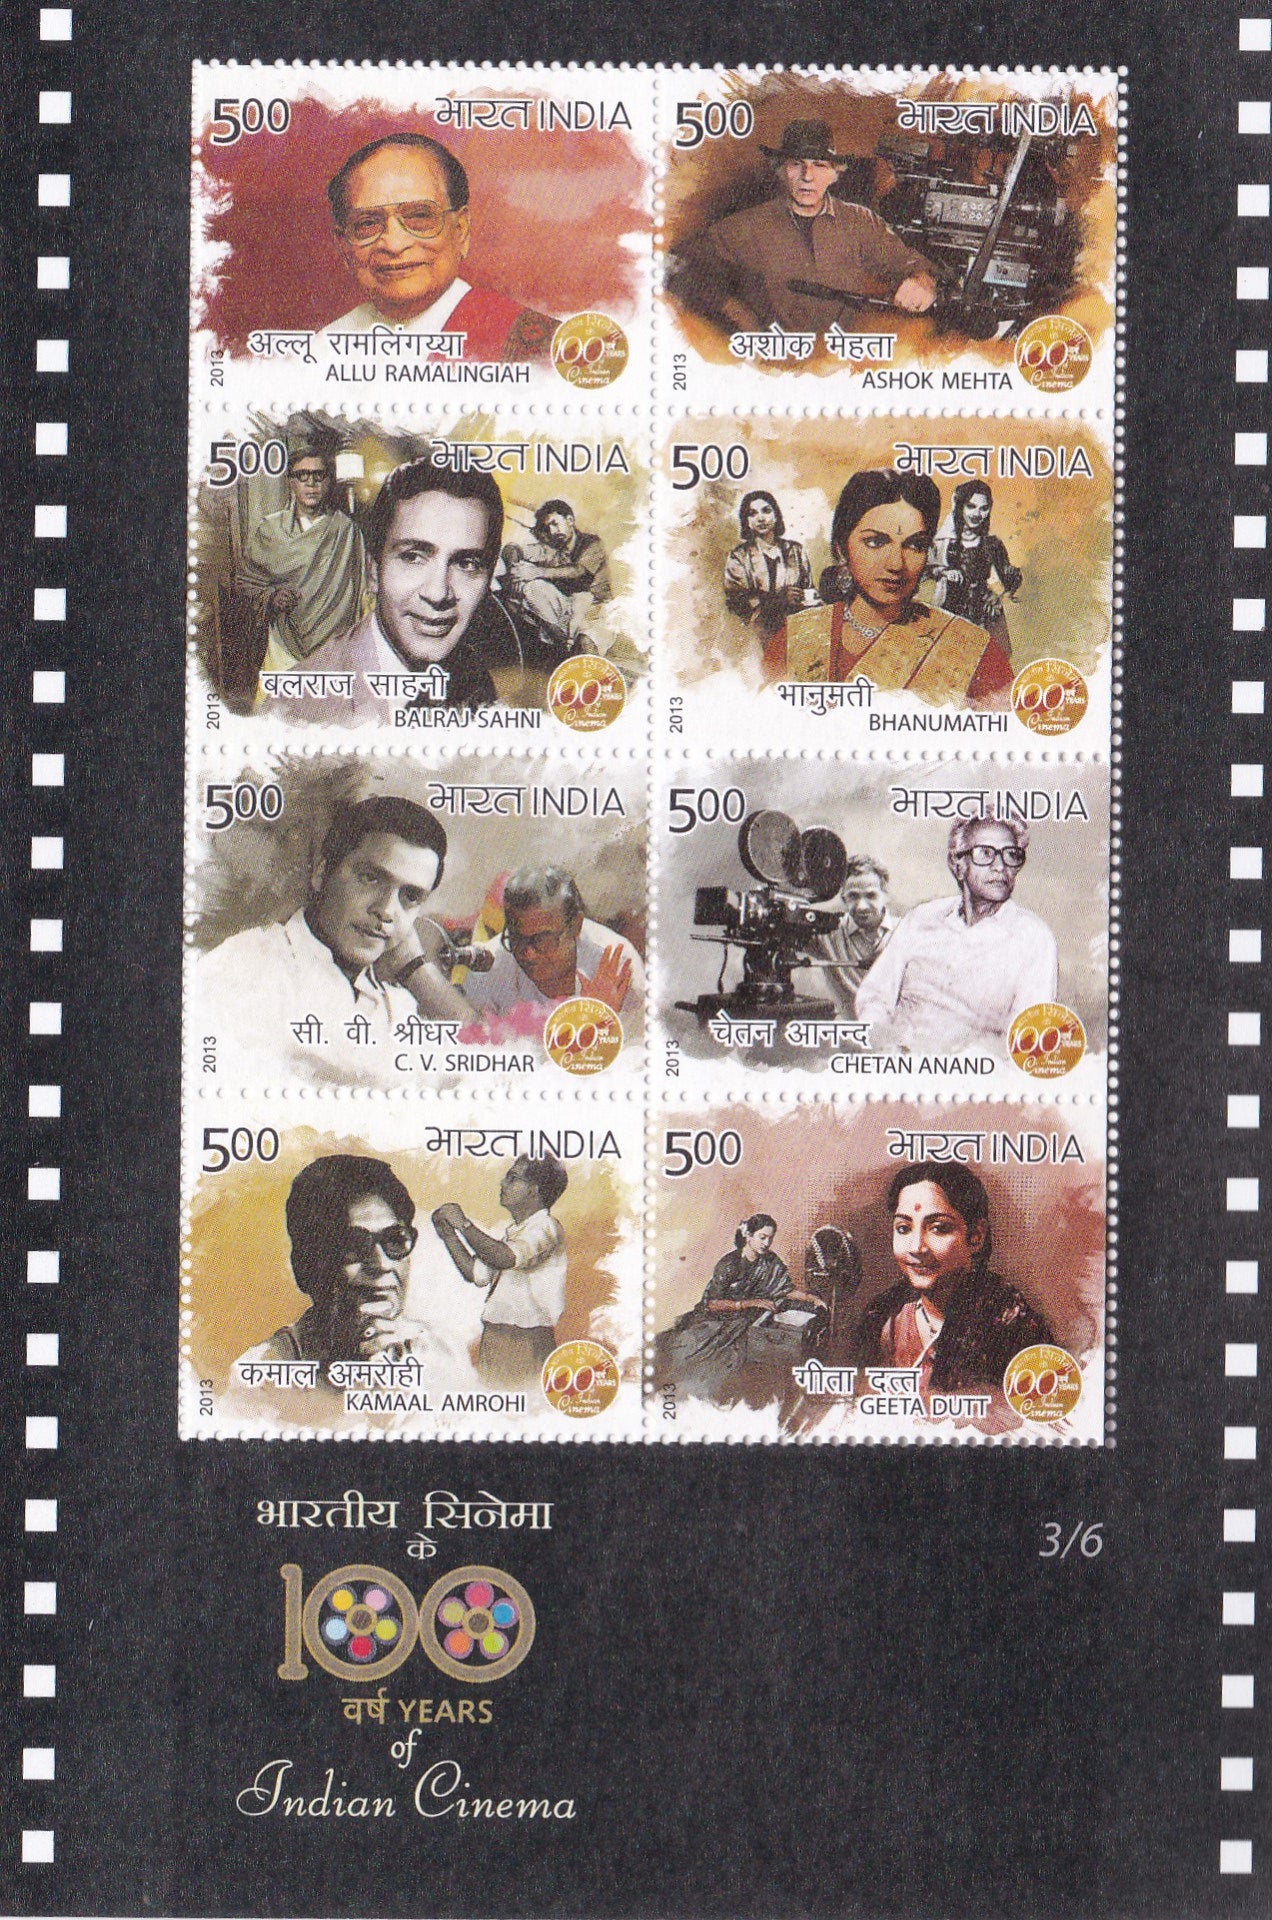 India- Sheetlets 100 Years of Indian Cinema Composite Sheetlet